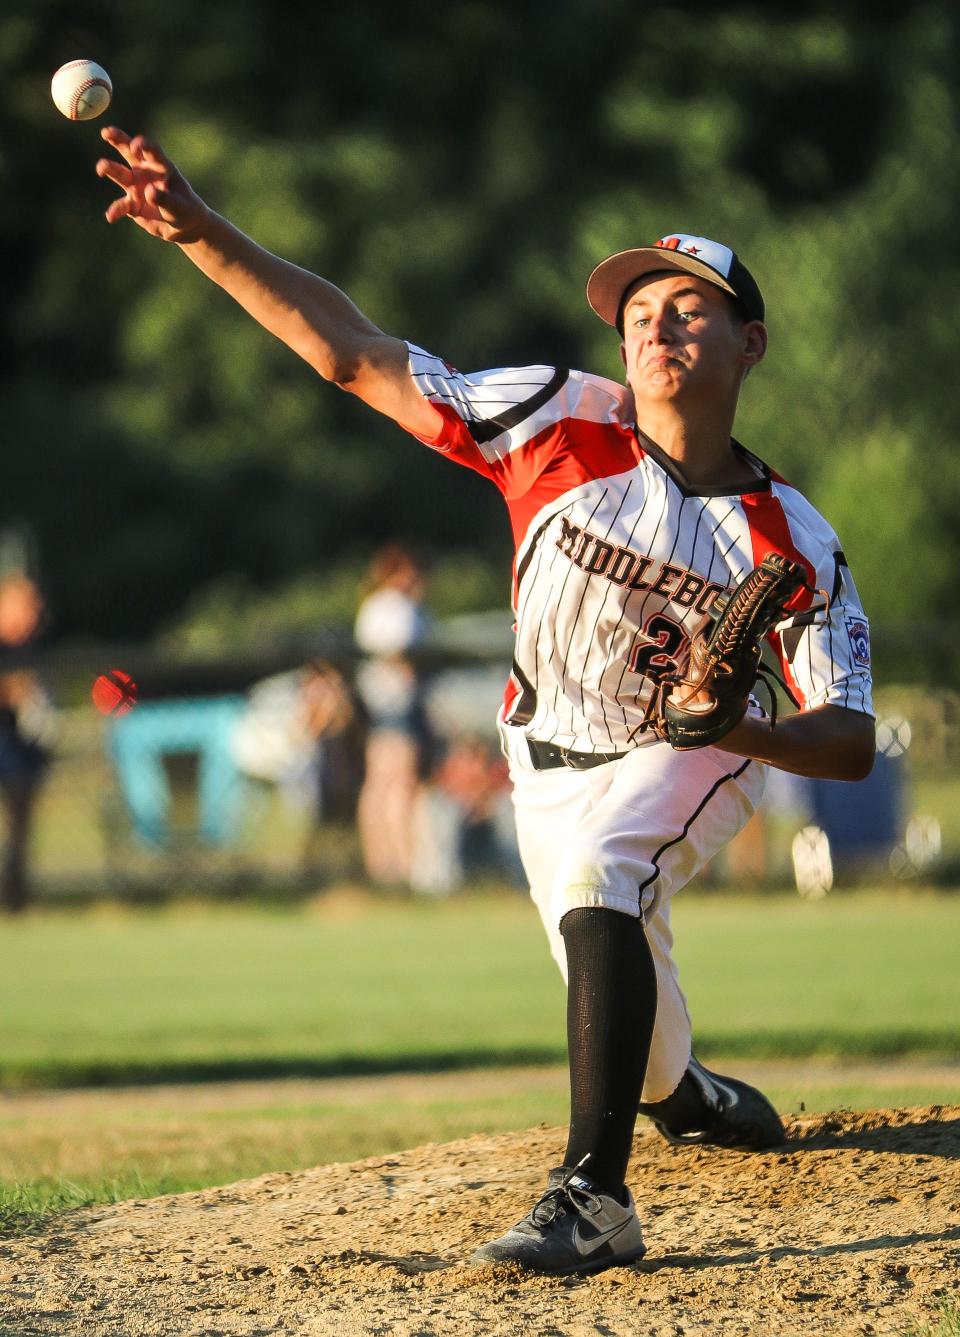 Middleboro U12's Aaron Davis delivers a pitch during a game against Hanover at Forge Pond Park in Hanover on Wednesday, July 20, 2022.